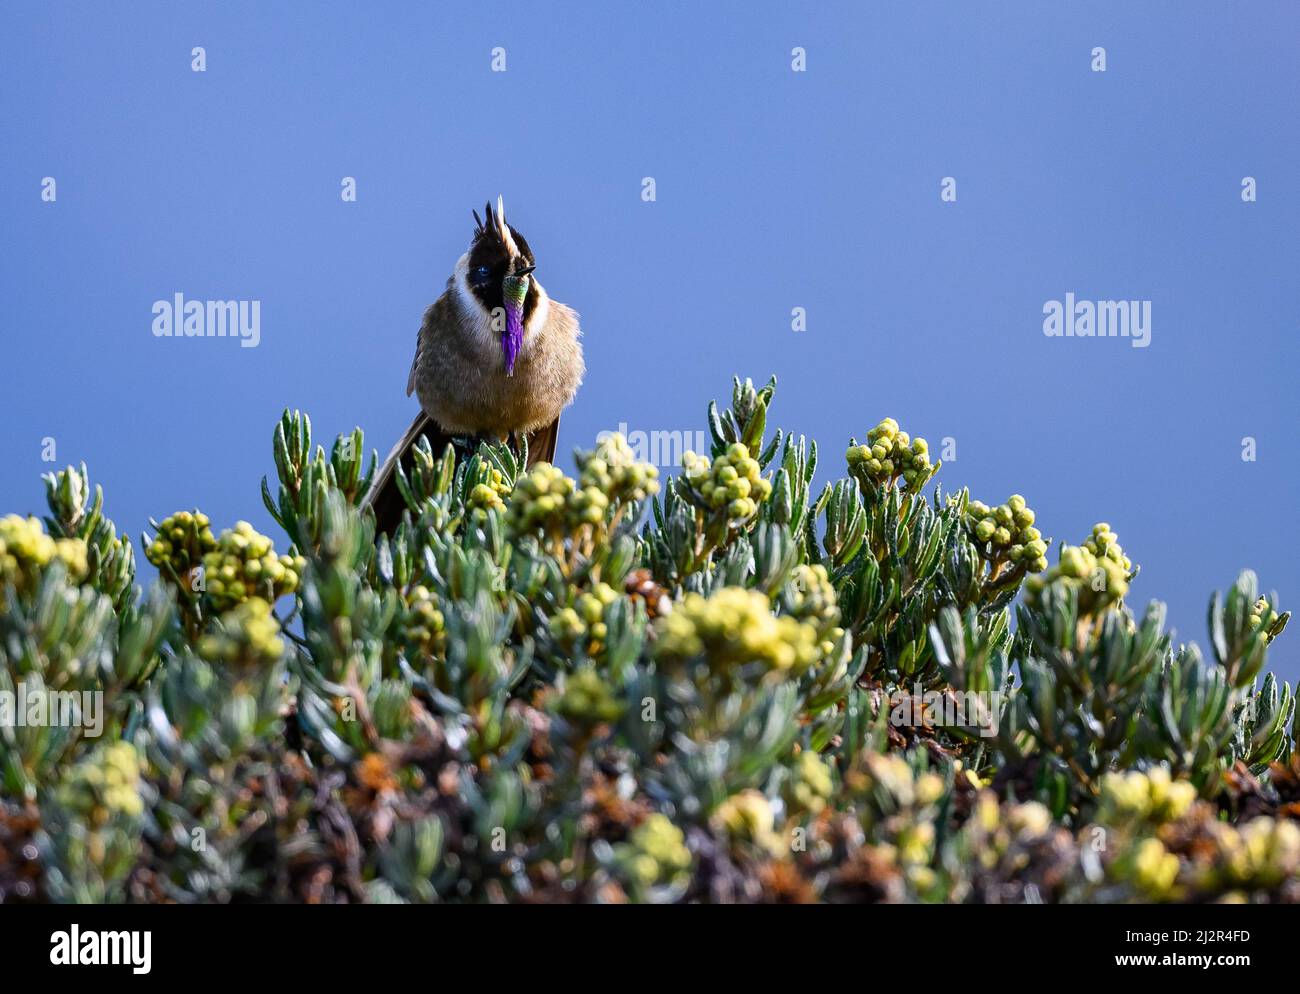 A Buffy Helmetcrest hummingbird (Oxypogon stuebelii) perched on a flowering tree. Colombia, South America. Stock Photo